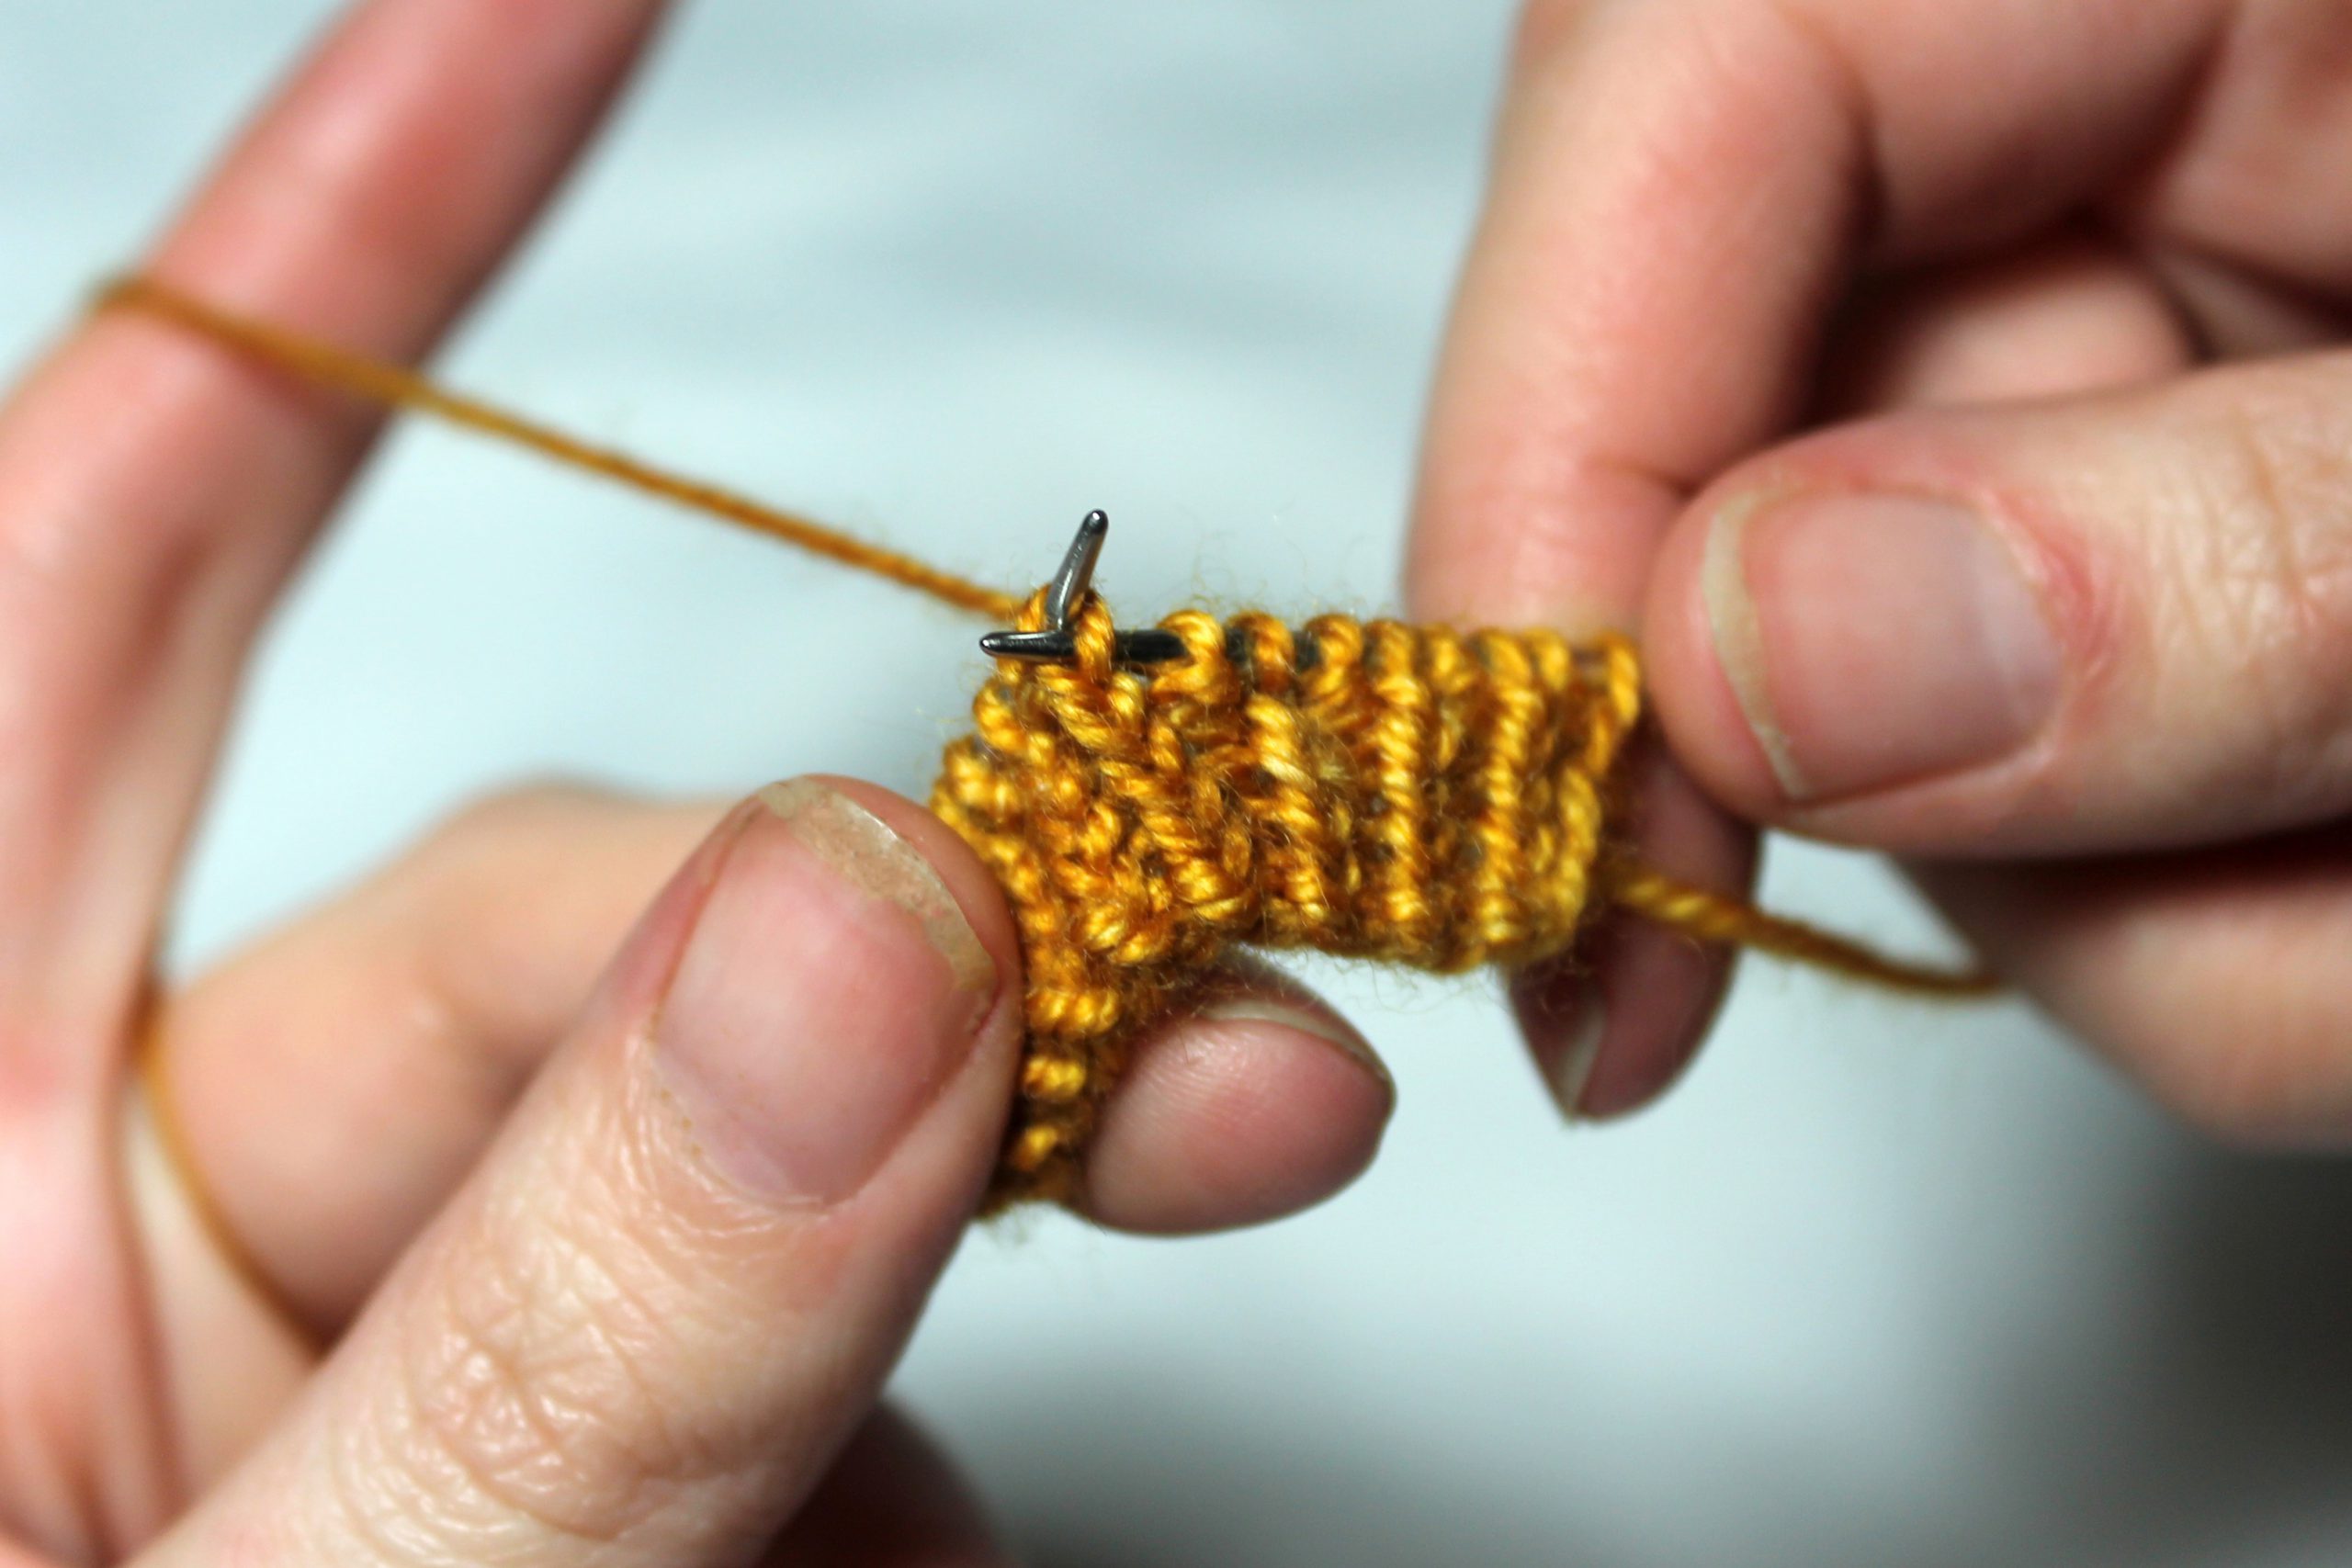 The right-hand needle has been inserted between the legs of the first stitch on the left-hand needle, from the back of the knitting